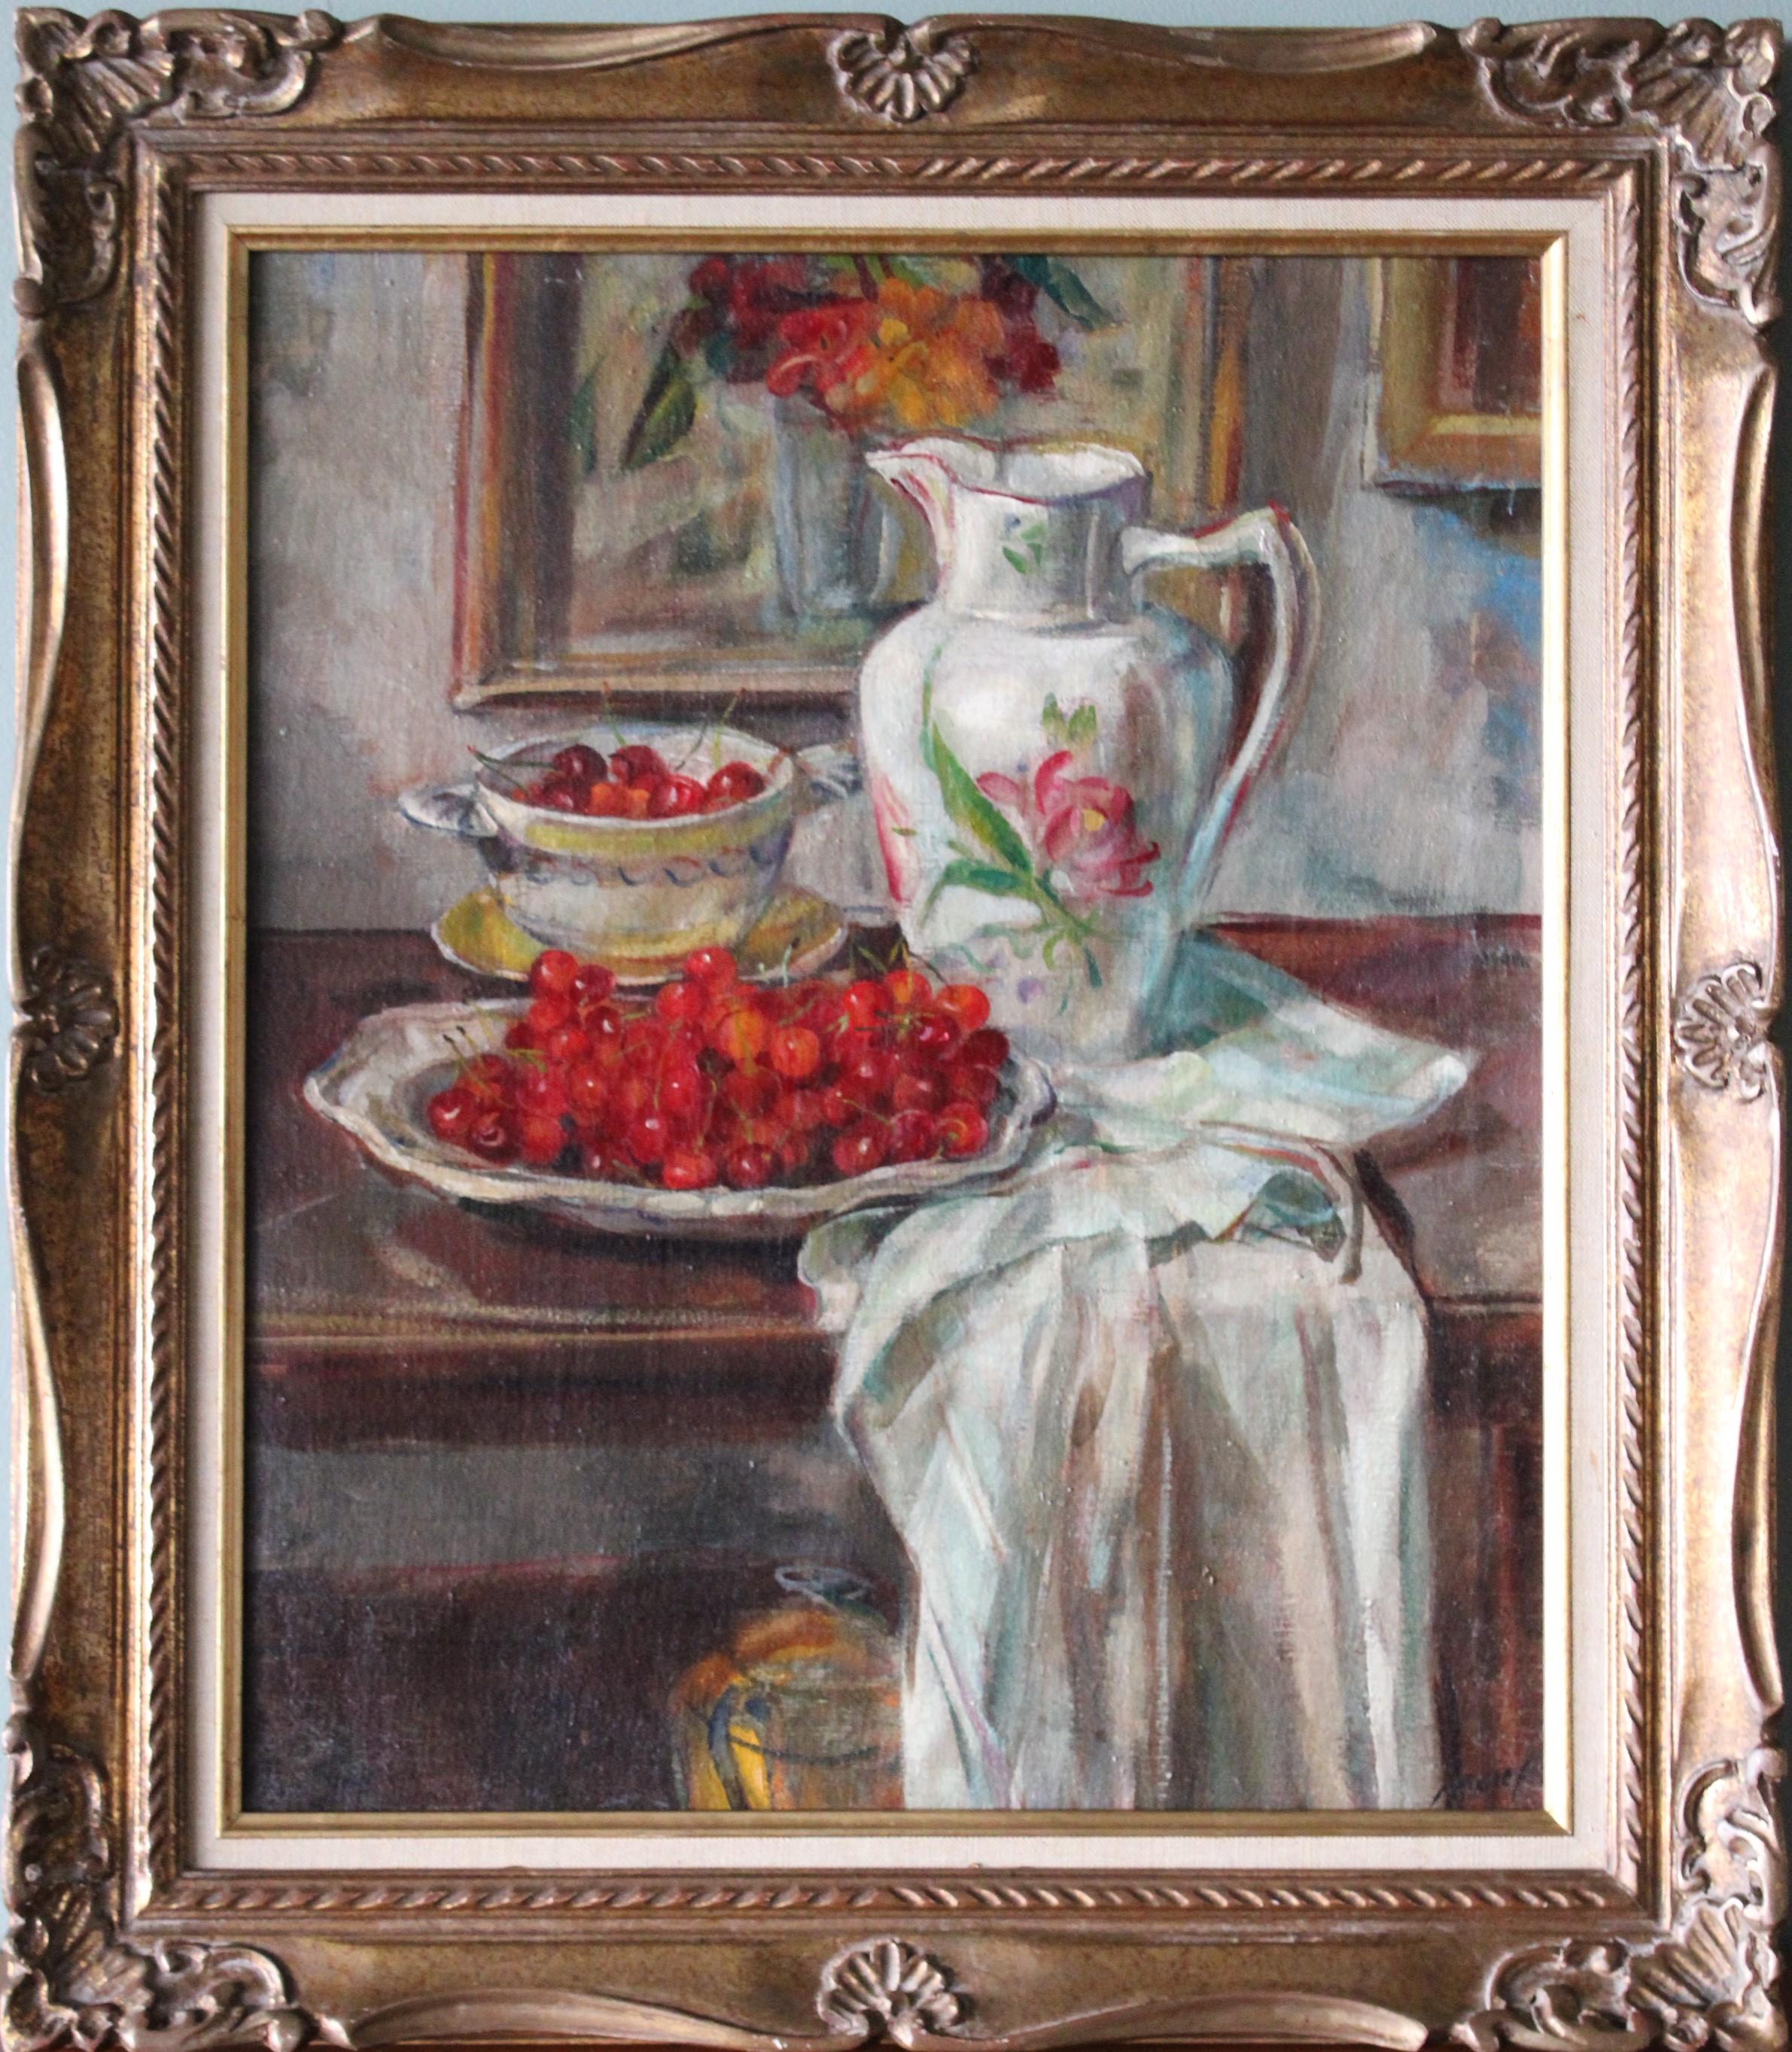 Antique early 1900's still life on stretched canvas, signed in the bottom right corner, Morel.  A very attractive interior scene oil painting of cherries on a silver plate and even more in a small bowl set on a table with a cloth dangling to add